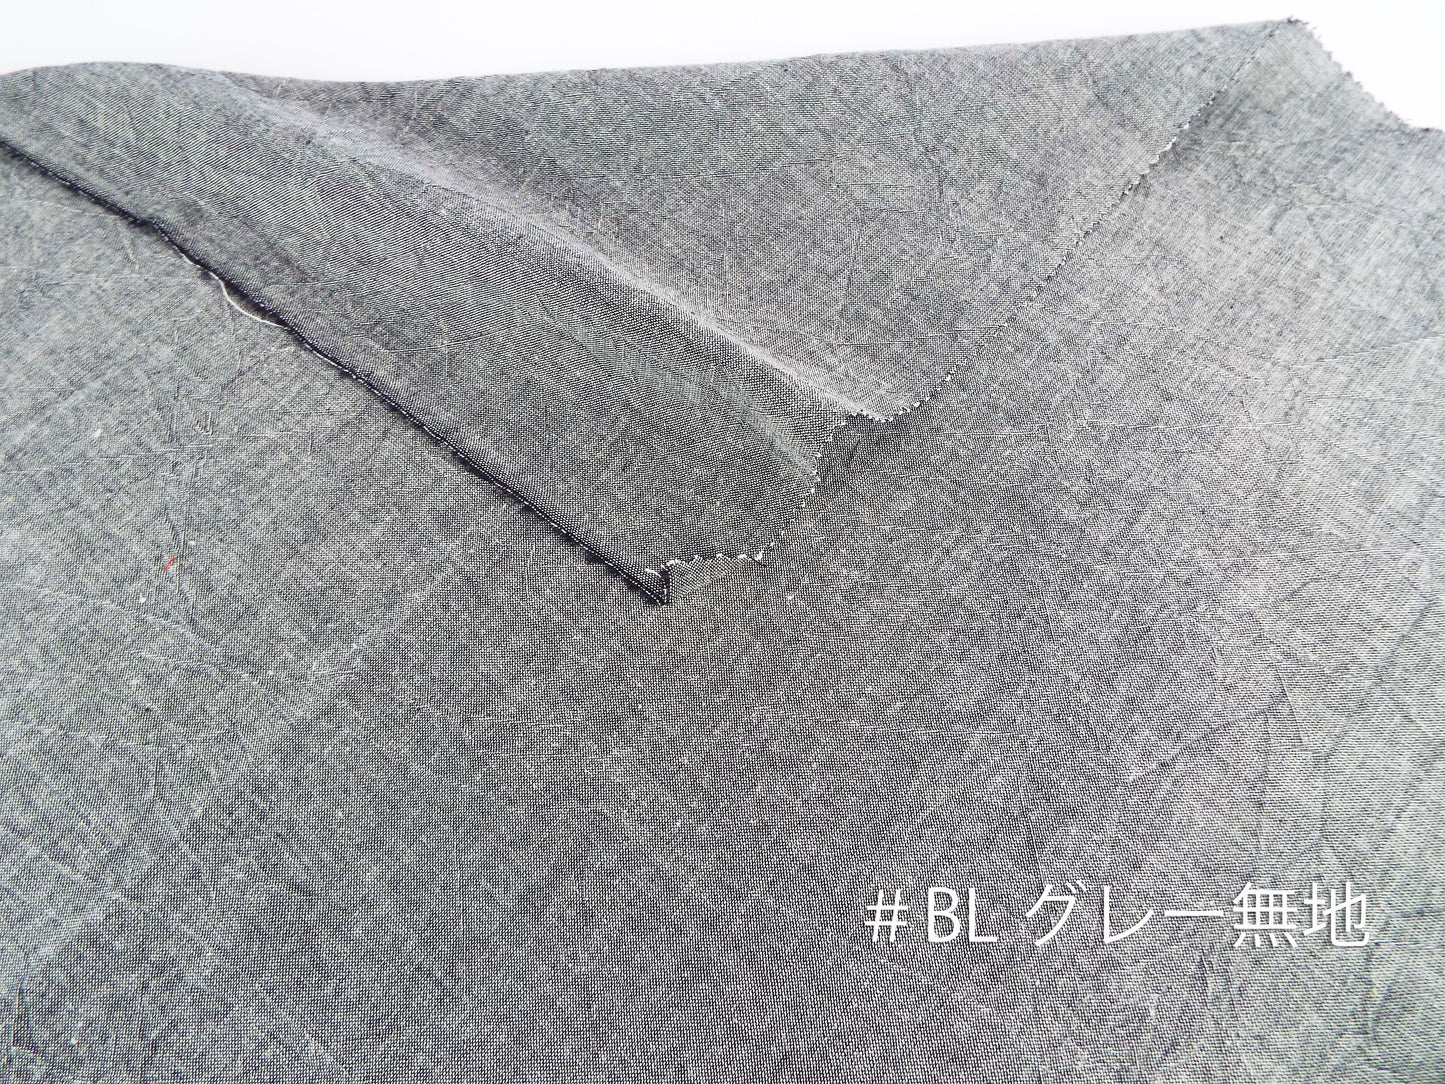 Kameda striped cotton fabric BL plain gray plain wrinkle processing thick fabric goes well with jeans